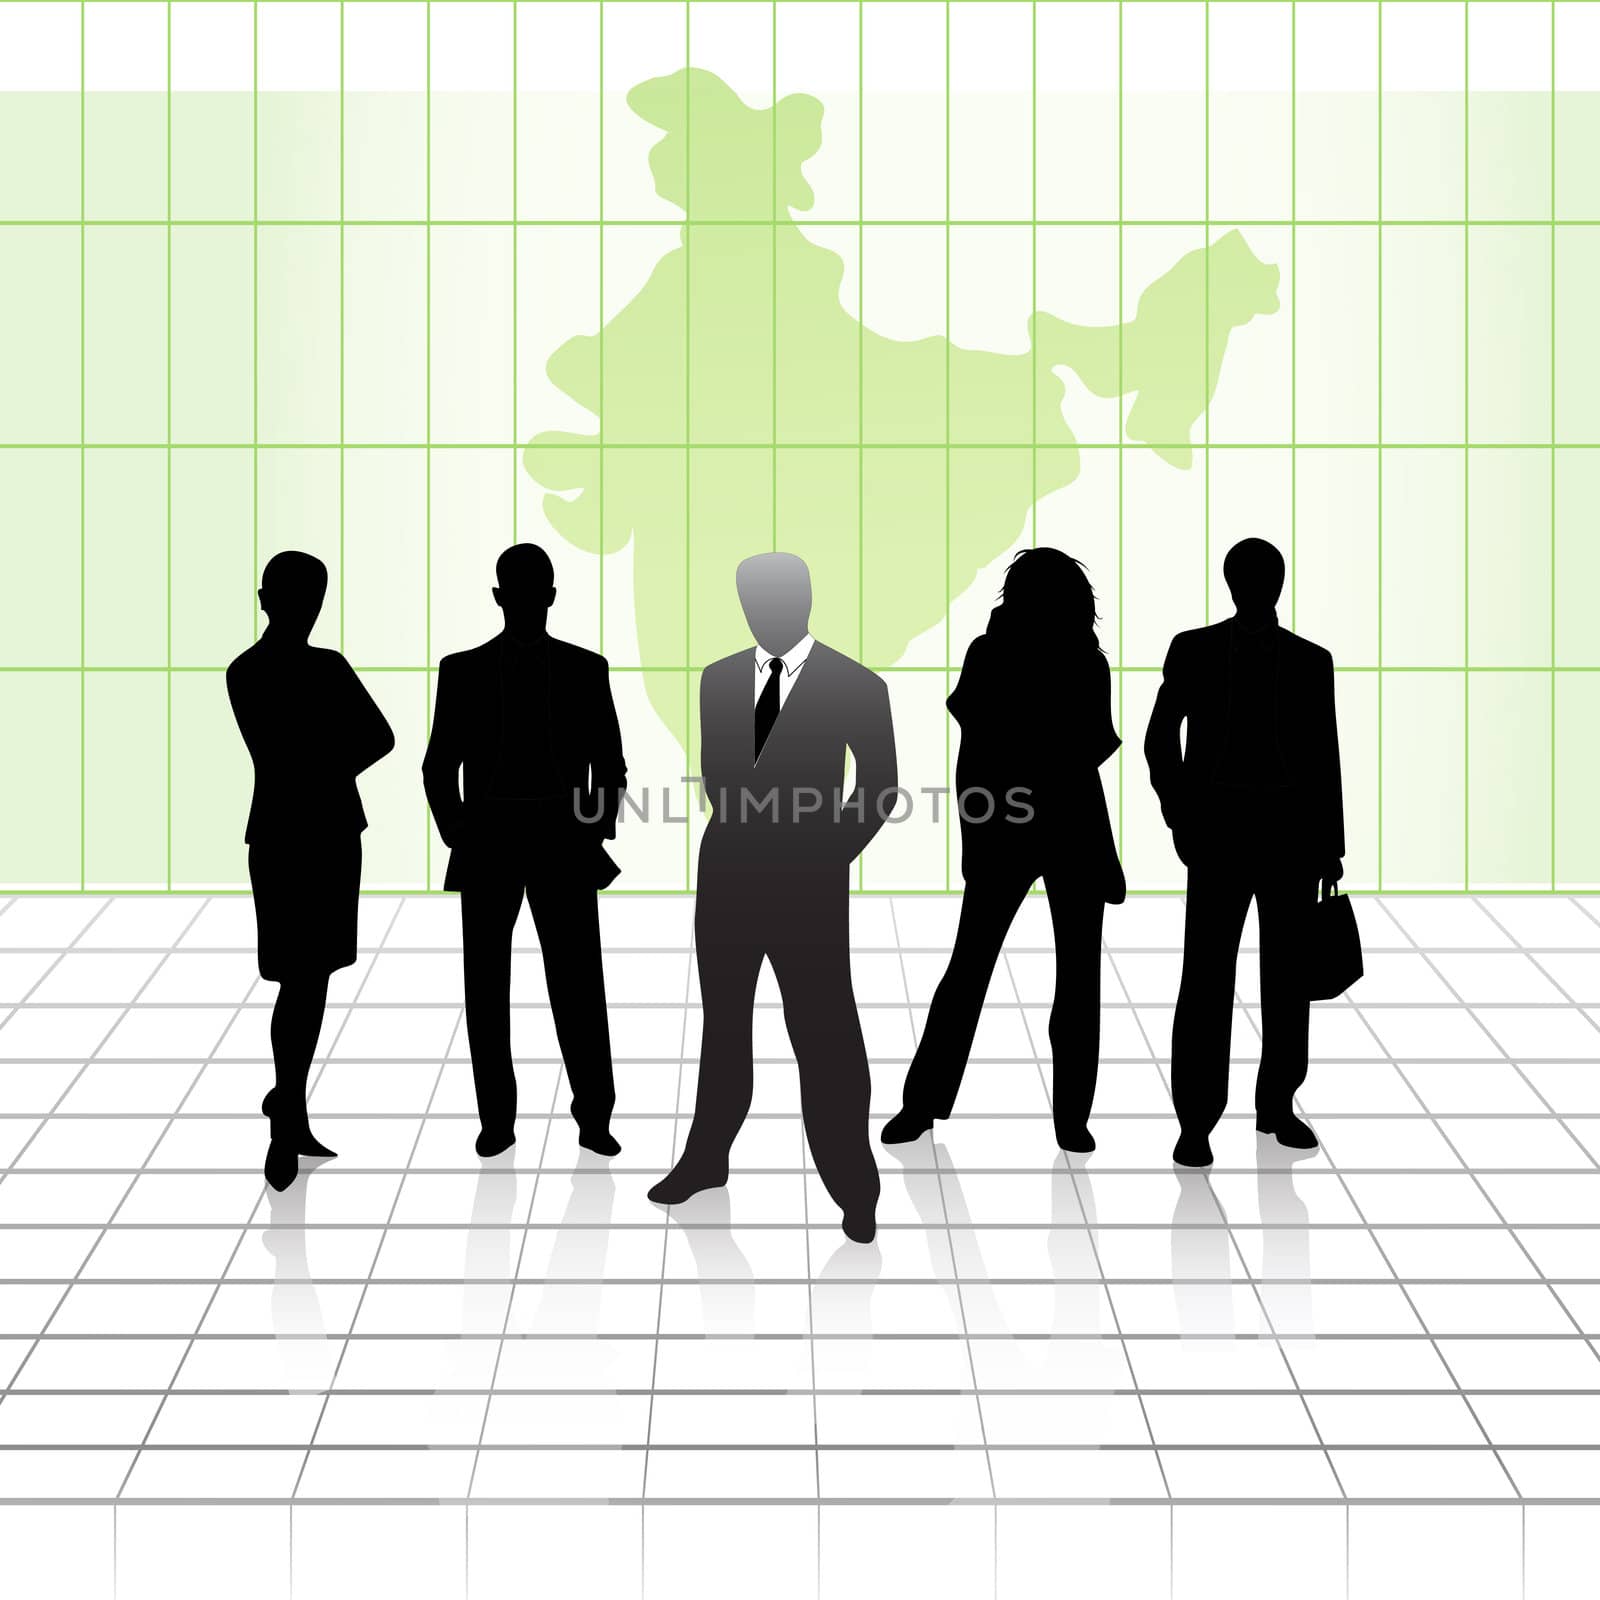 team of business men with india map background